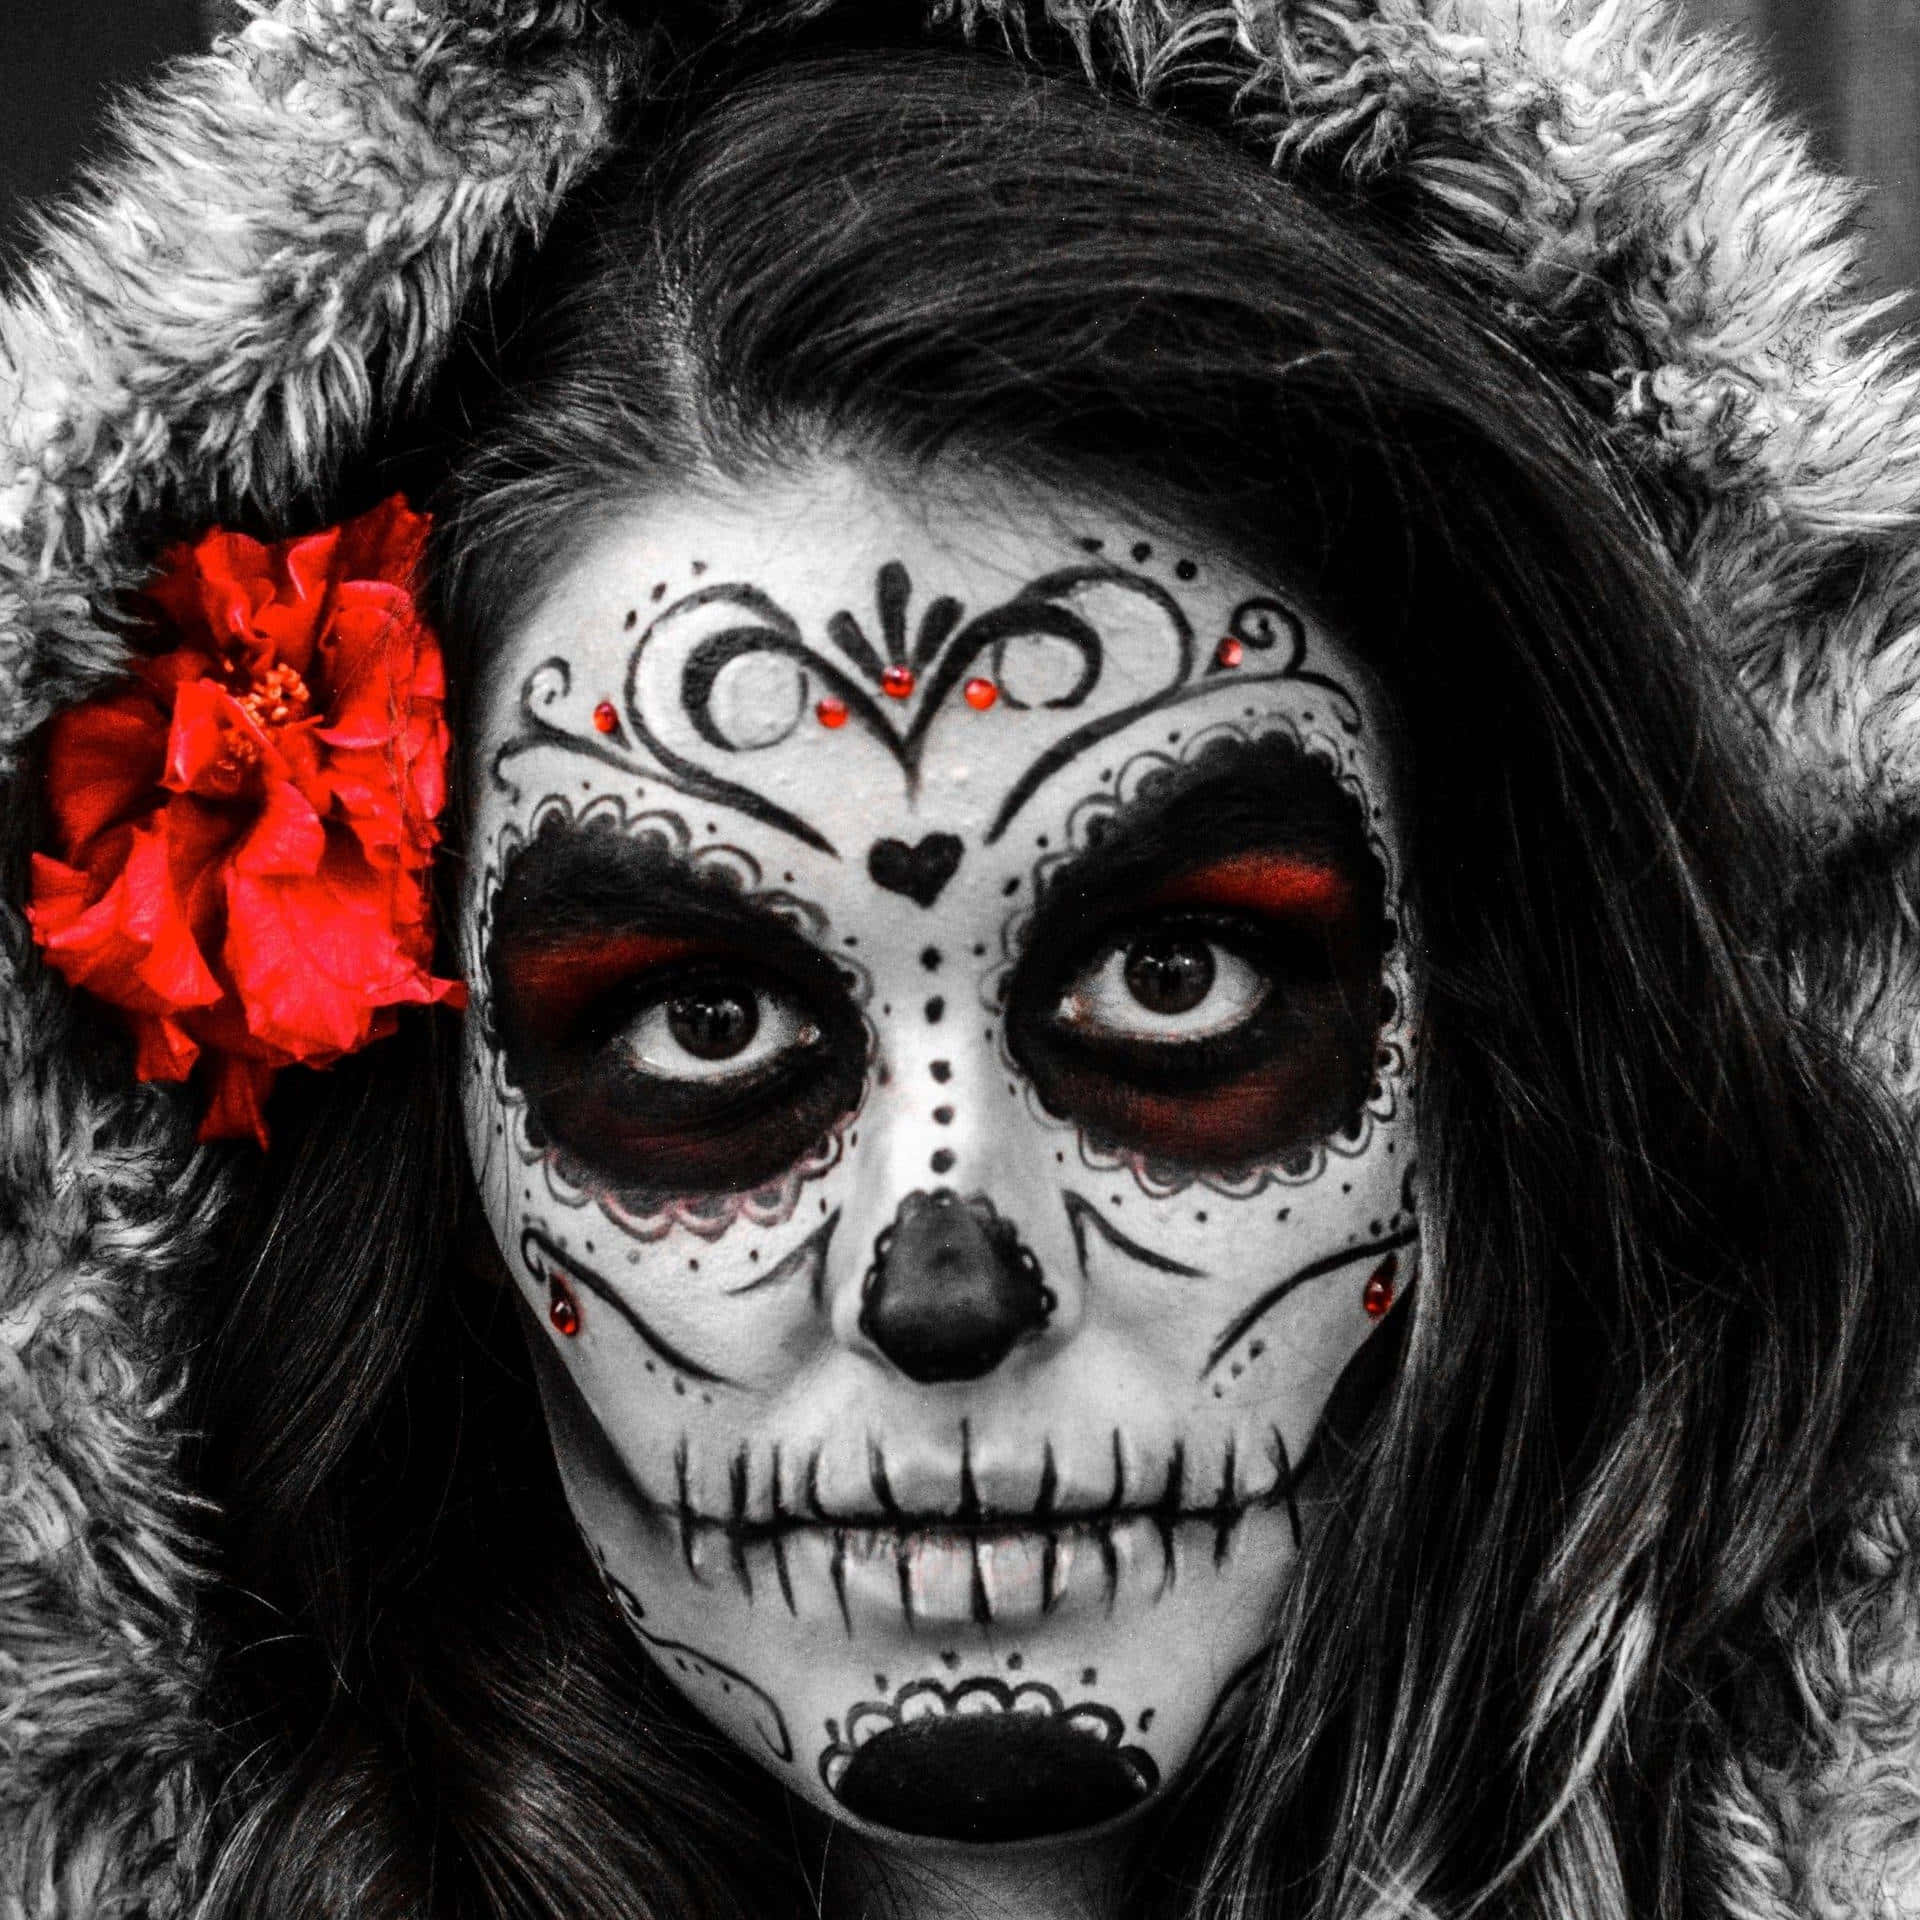 A colorful Sugar Skull inspired design graces this mobile phone Wallpaper